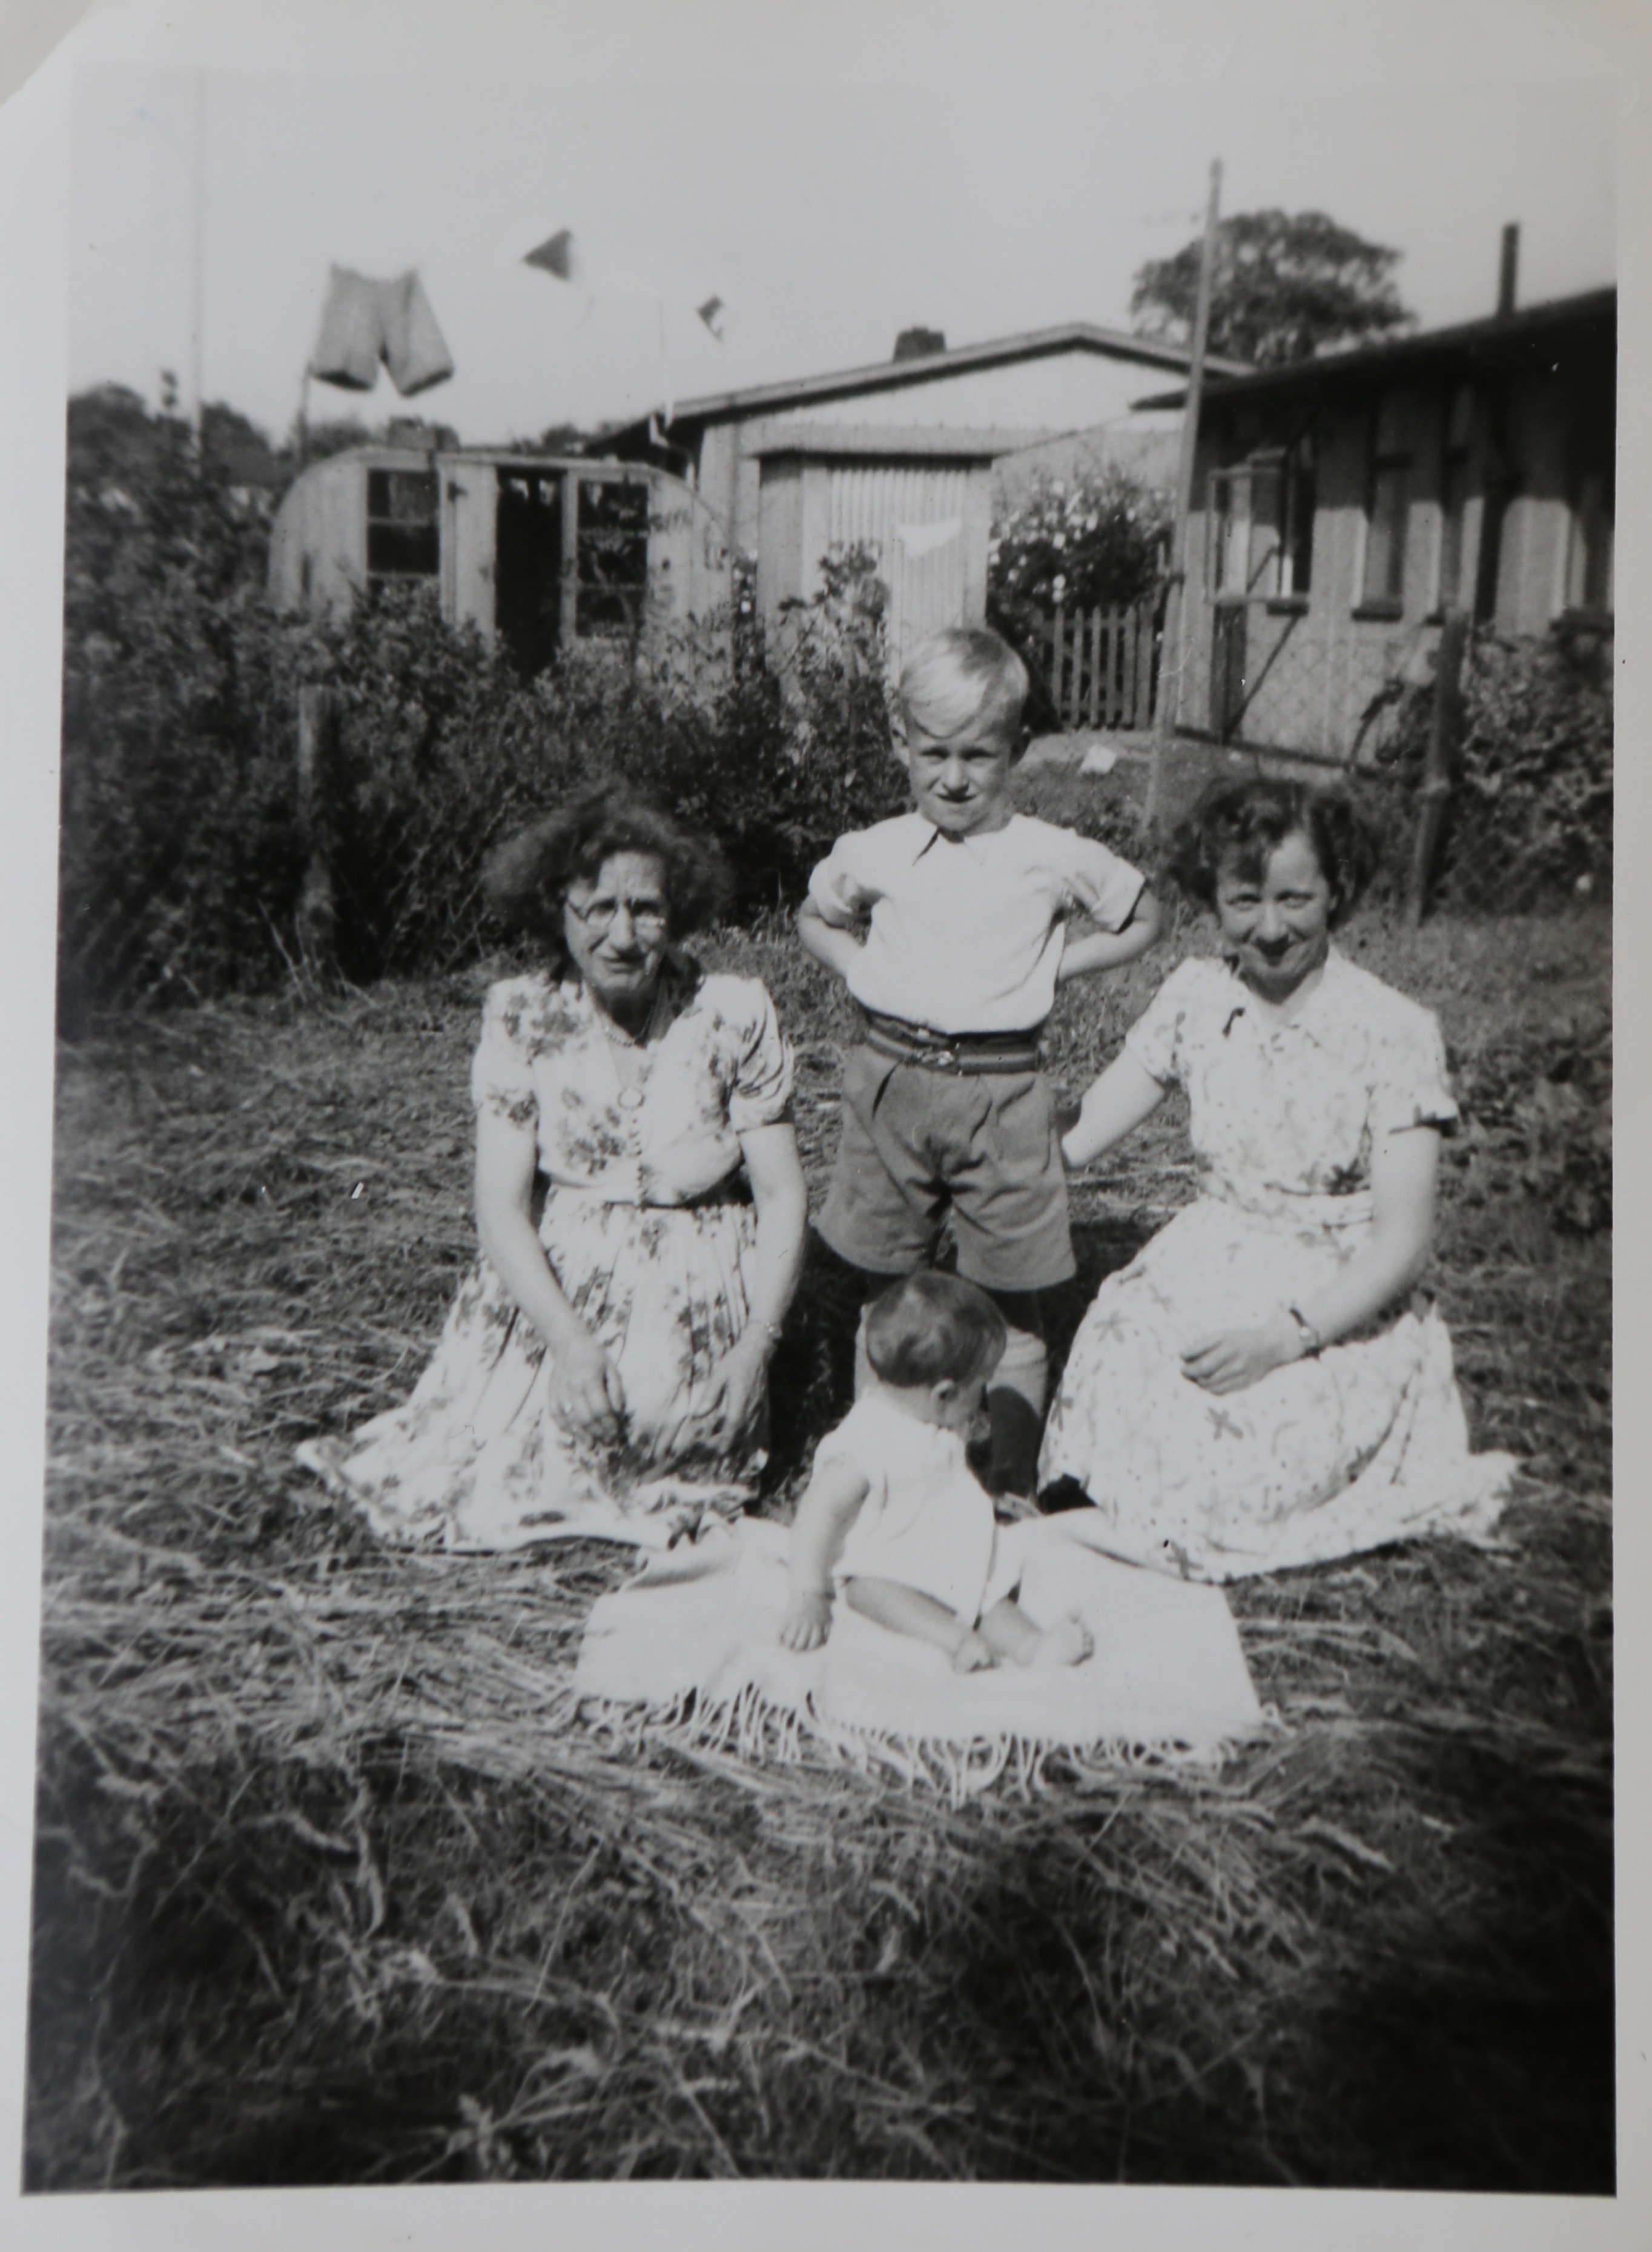 June Kapitan with her two children and friend